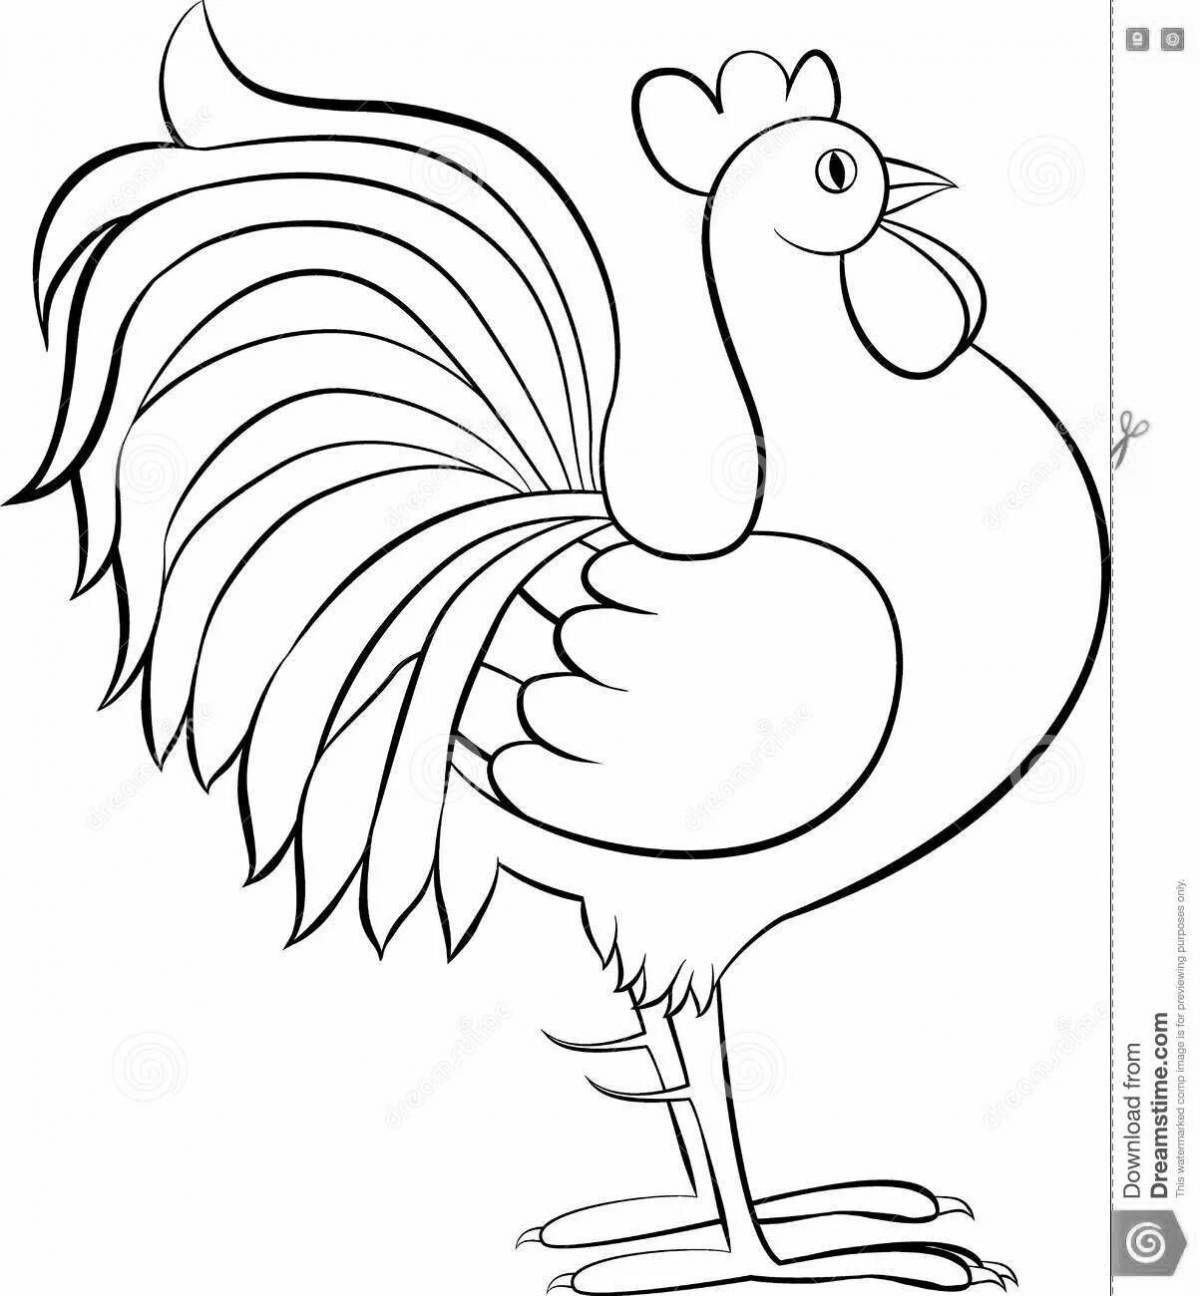 Fancy cockerel coloring book for kids 2-3 years old